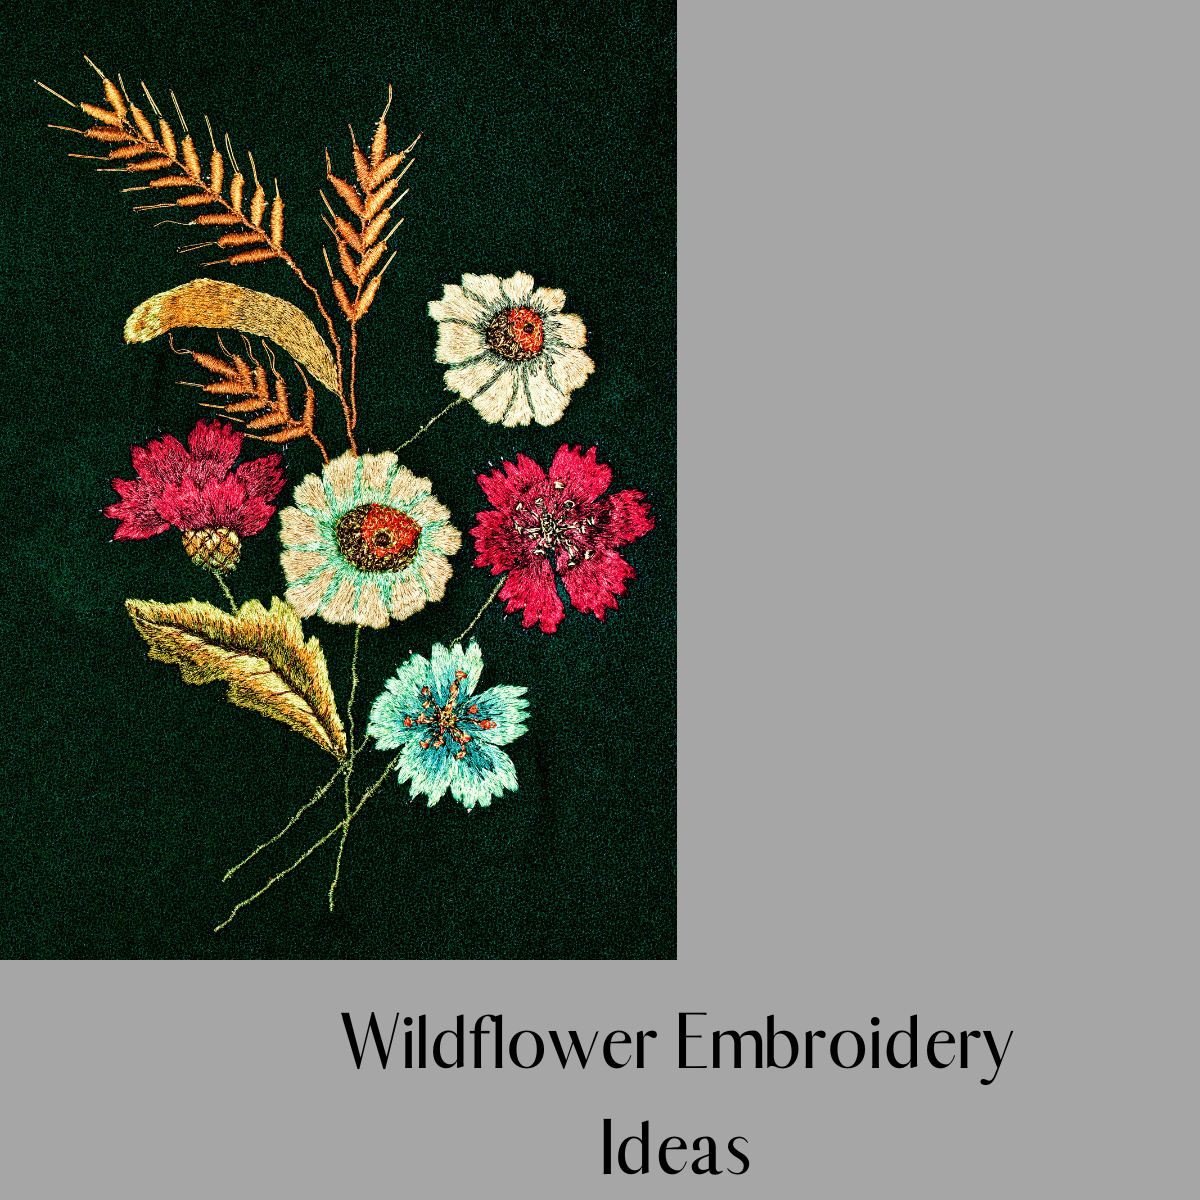 Wildflower embroidery